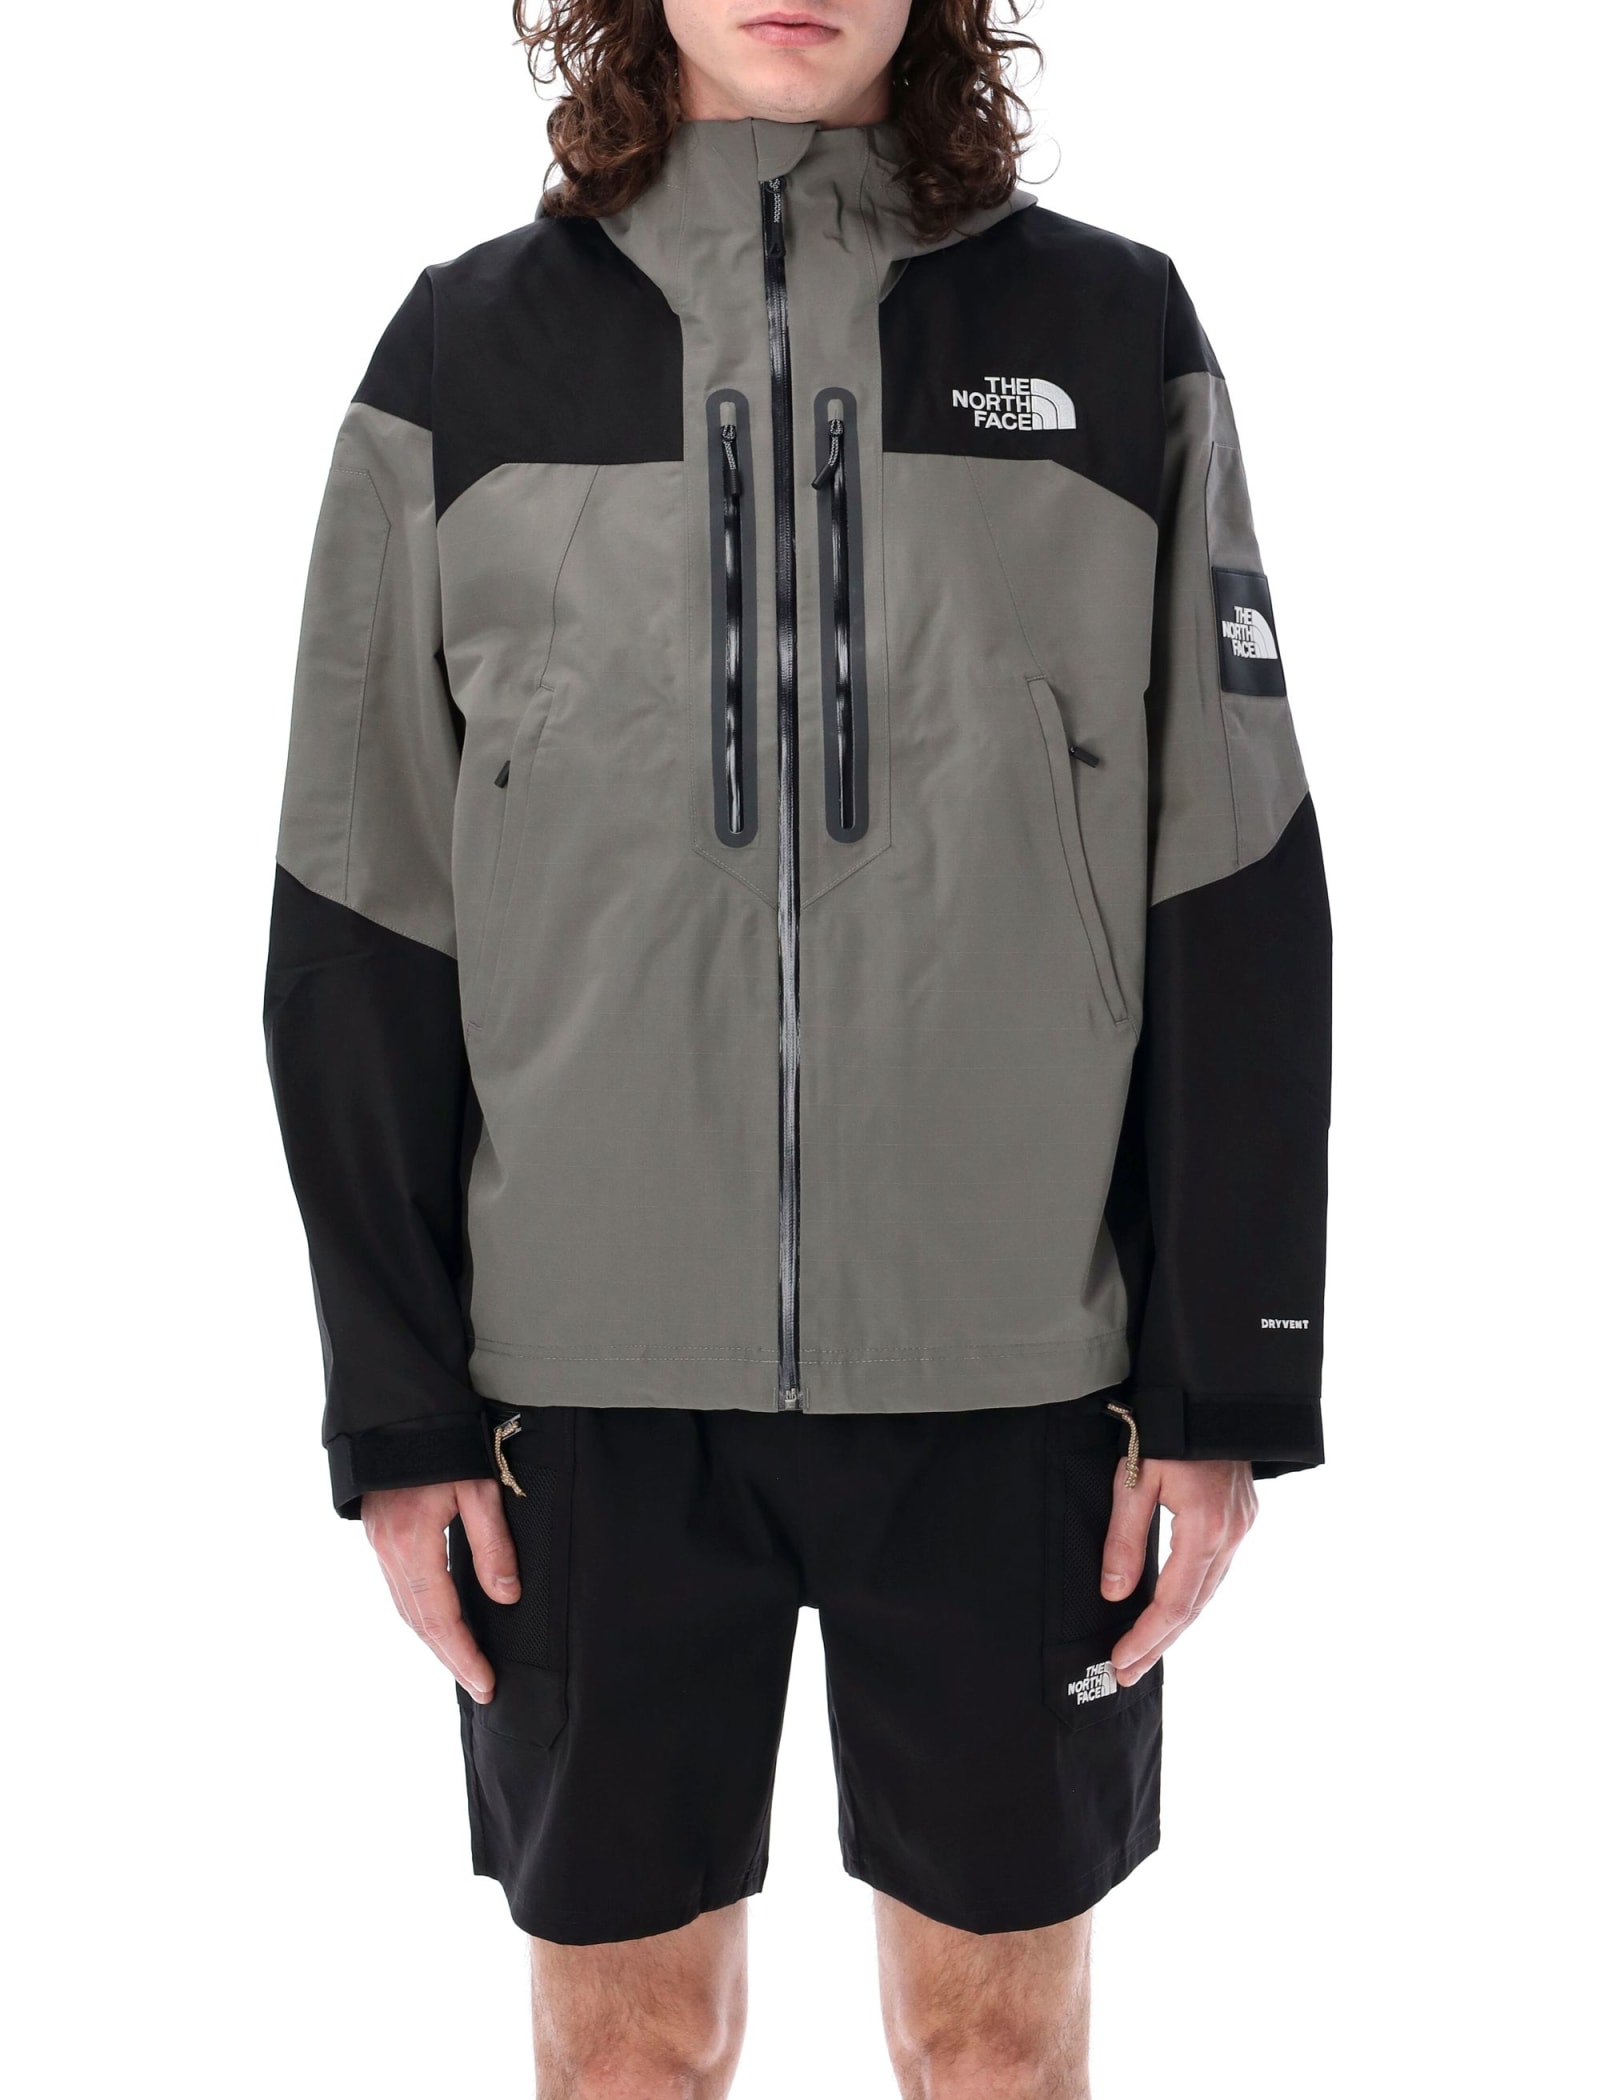 THE NORTH FACE TRASVERSE 2L DRYVENT JACKET